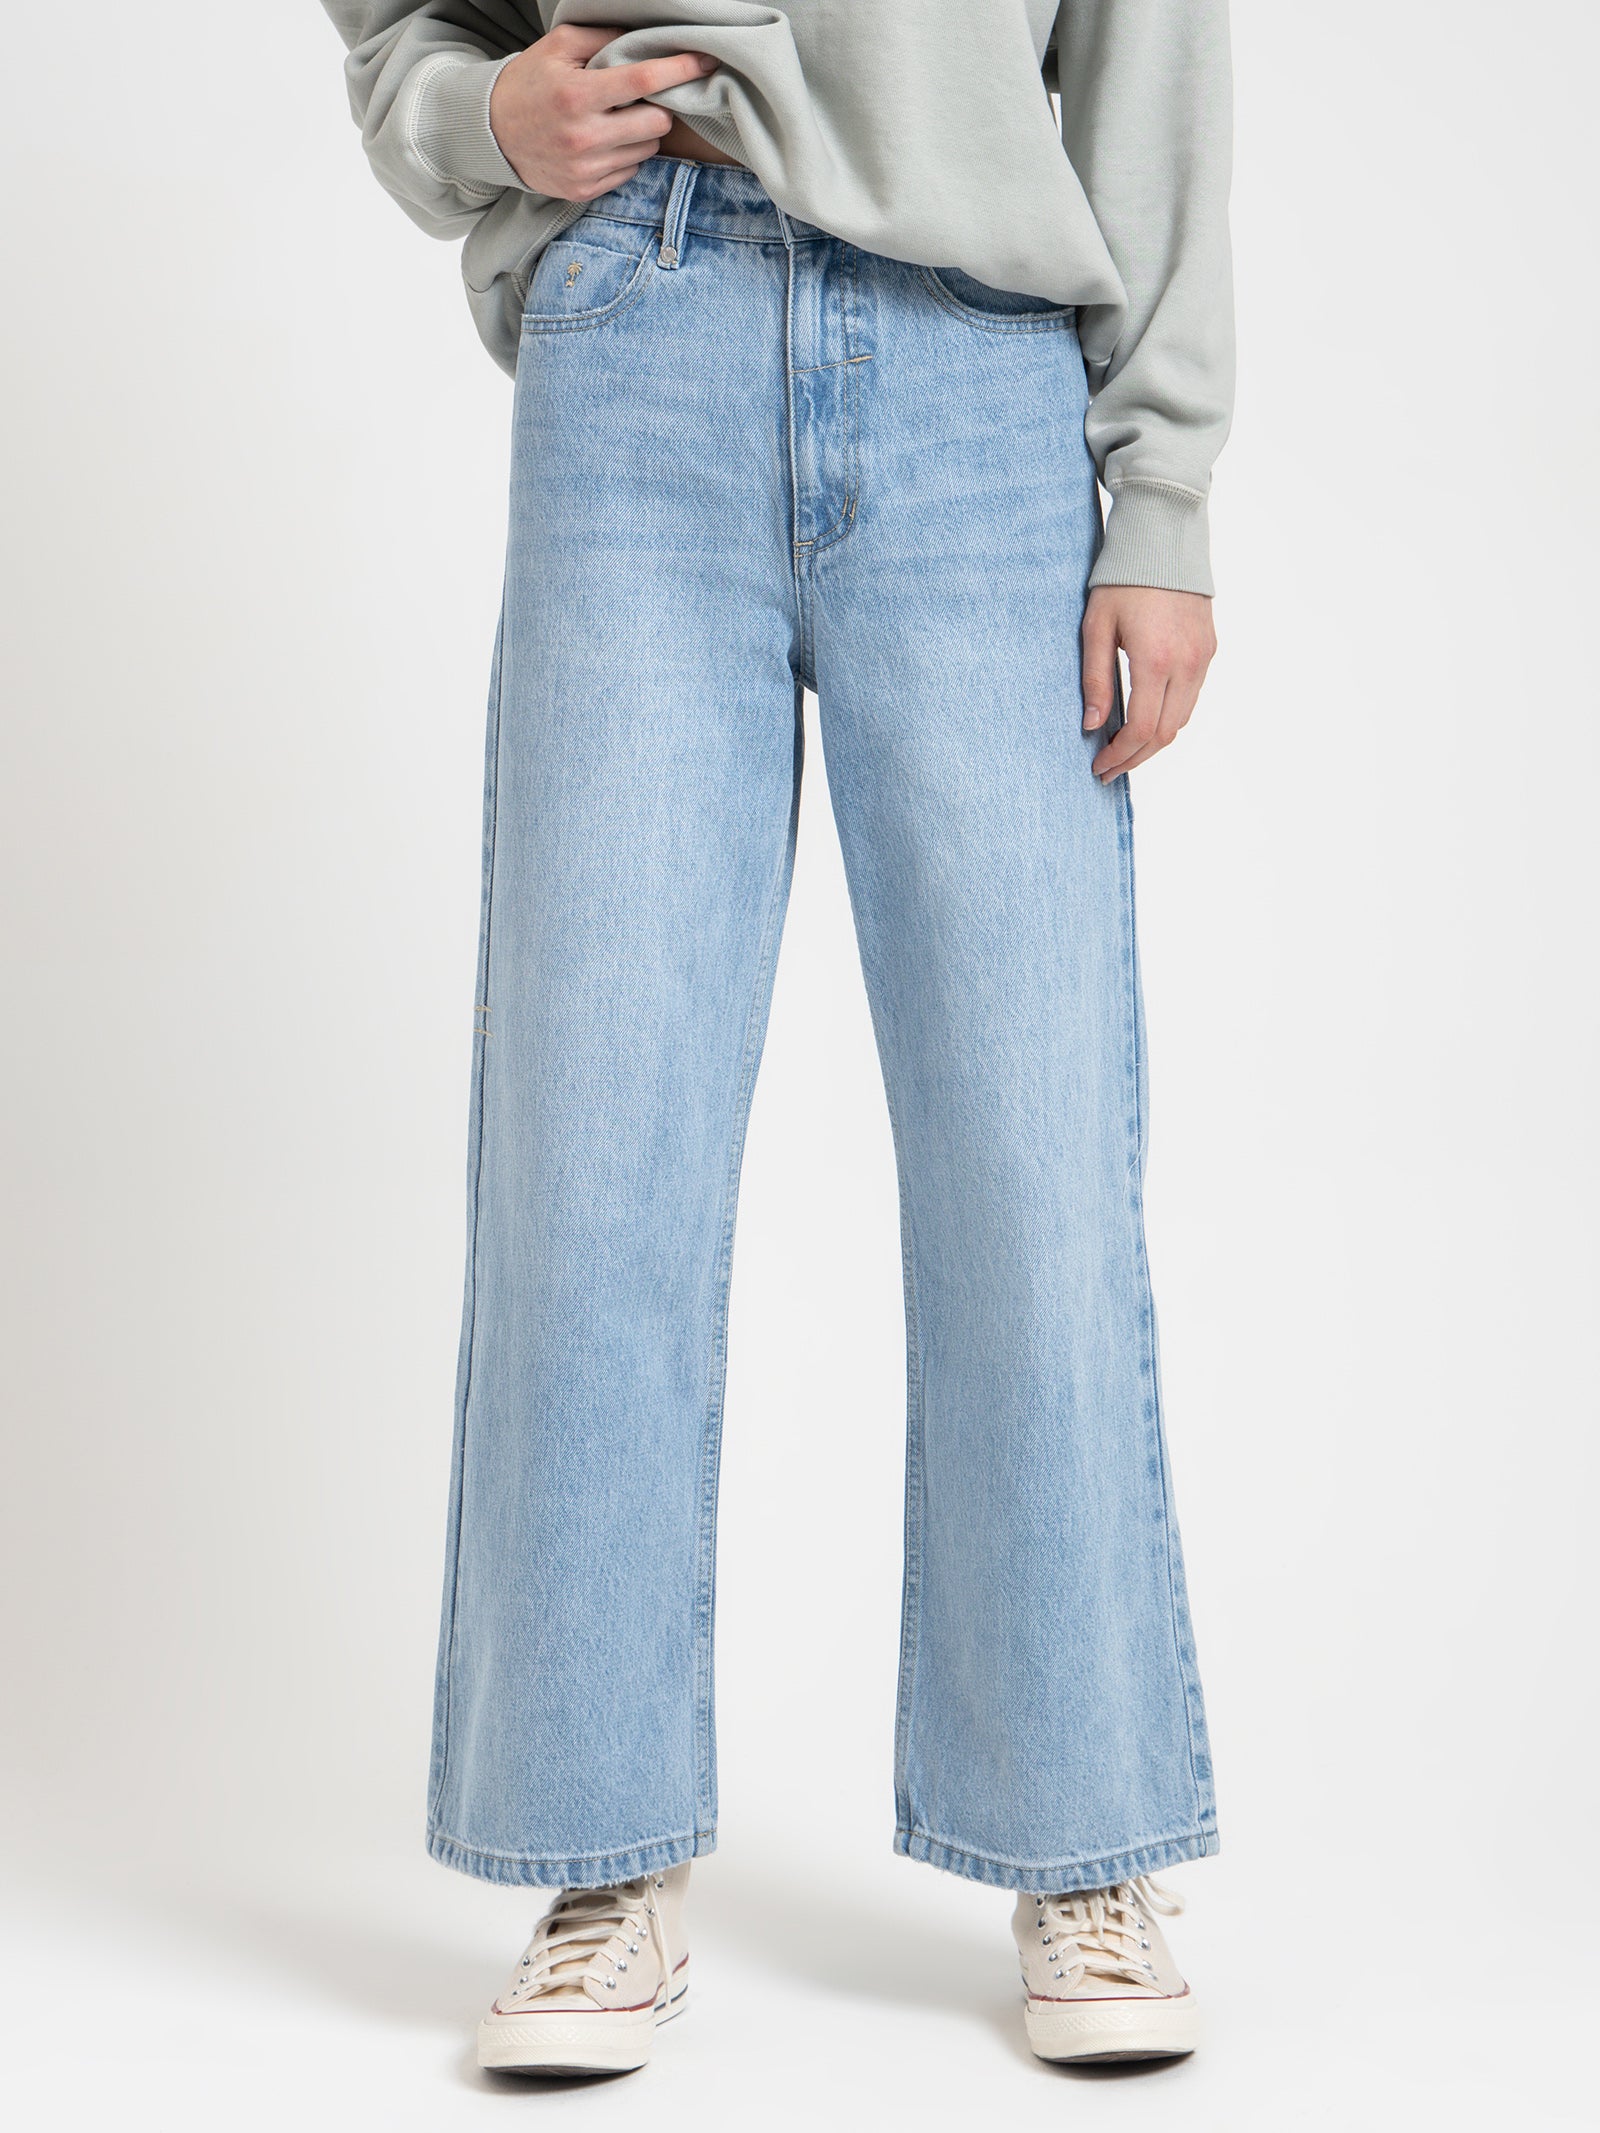 Holly Jeans in Ash Blue - Glue Store